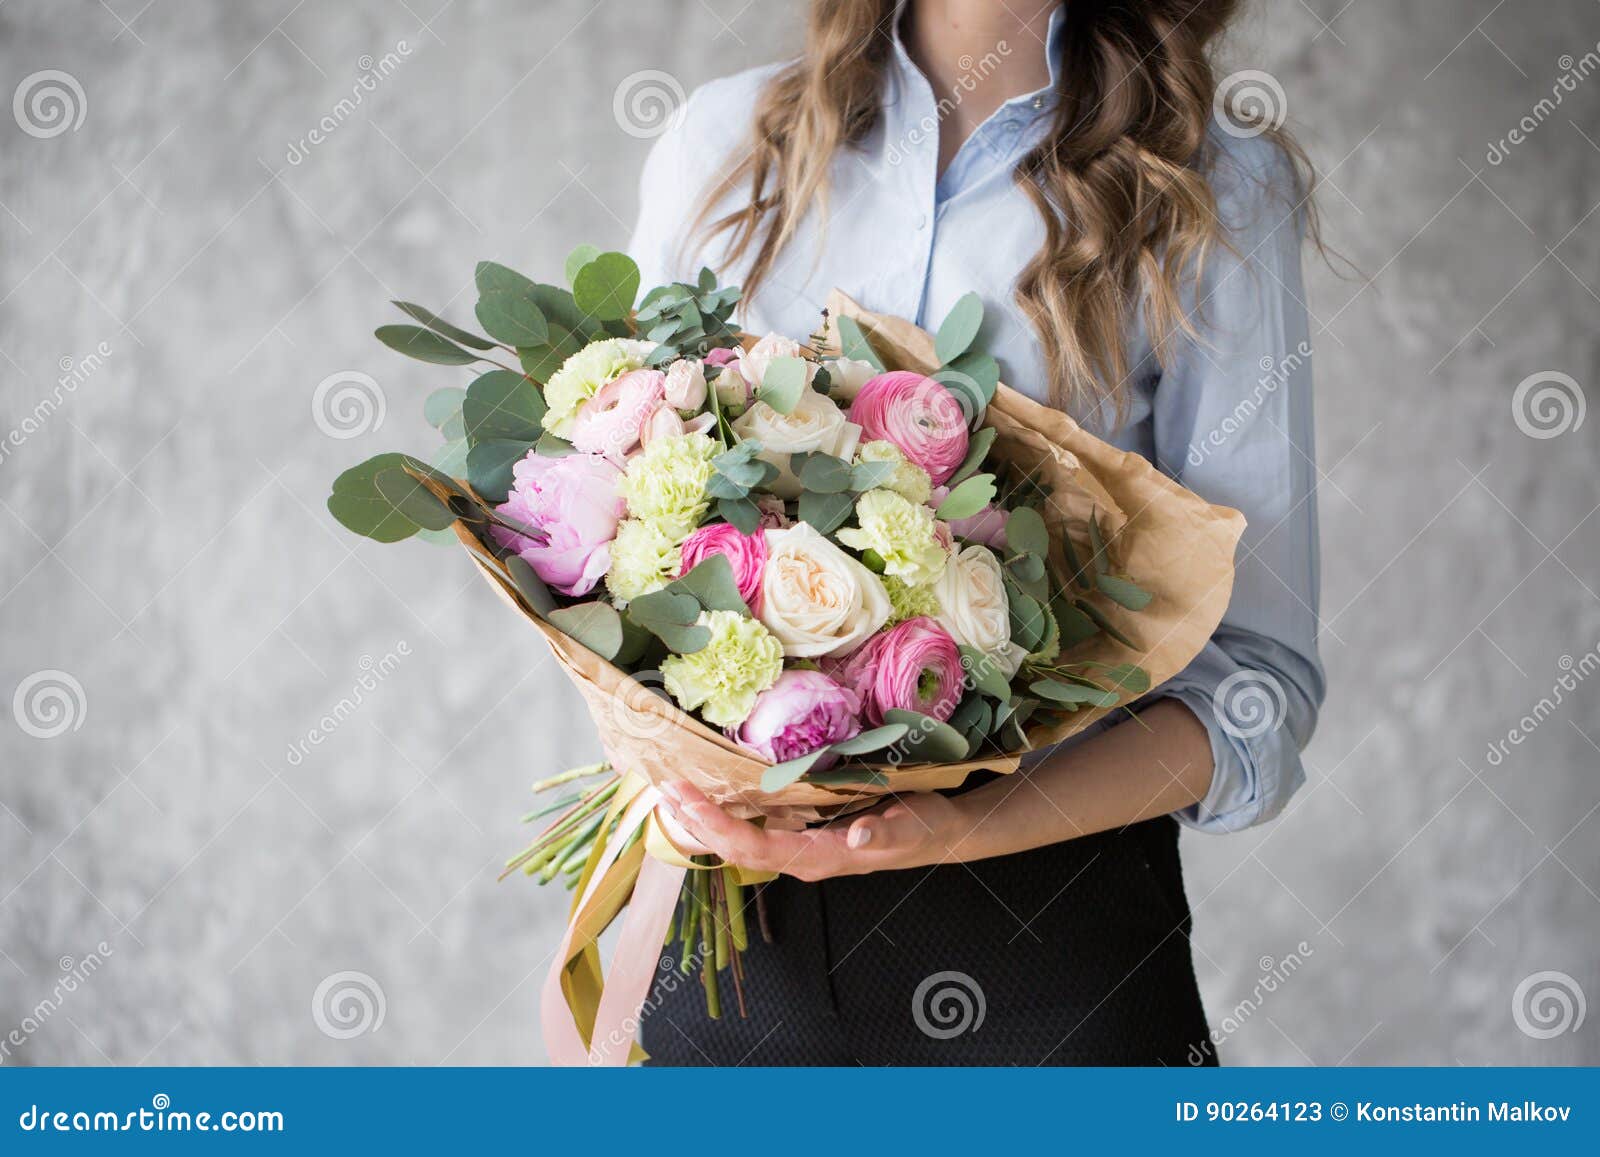 florist at work: pretty young woman making fashion modern bouquet of different flowers